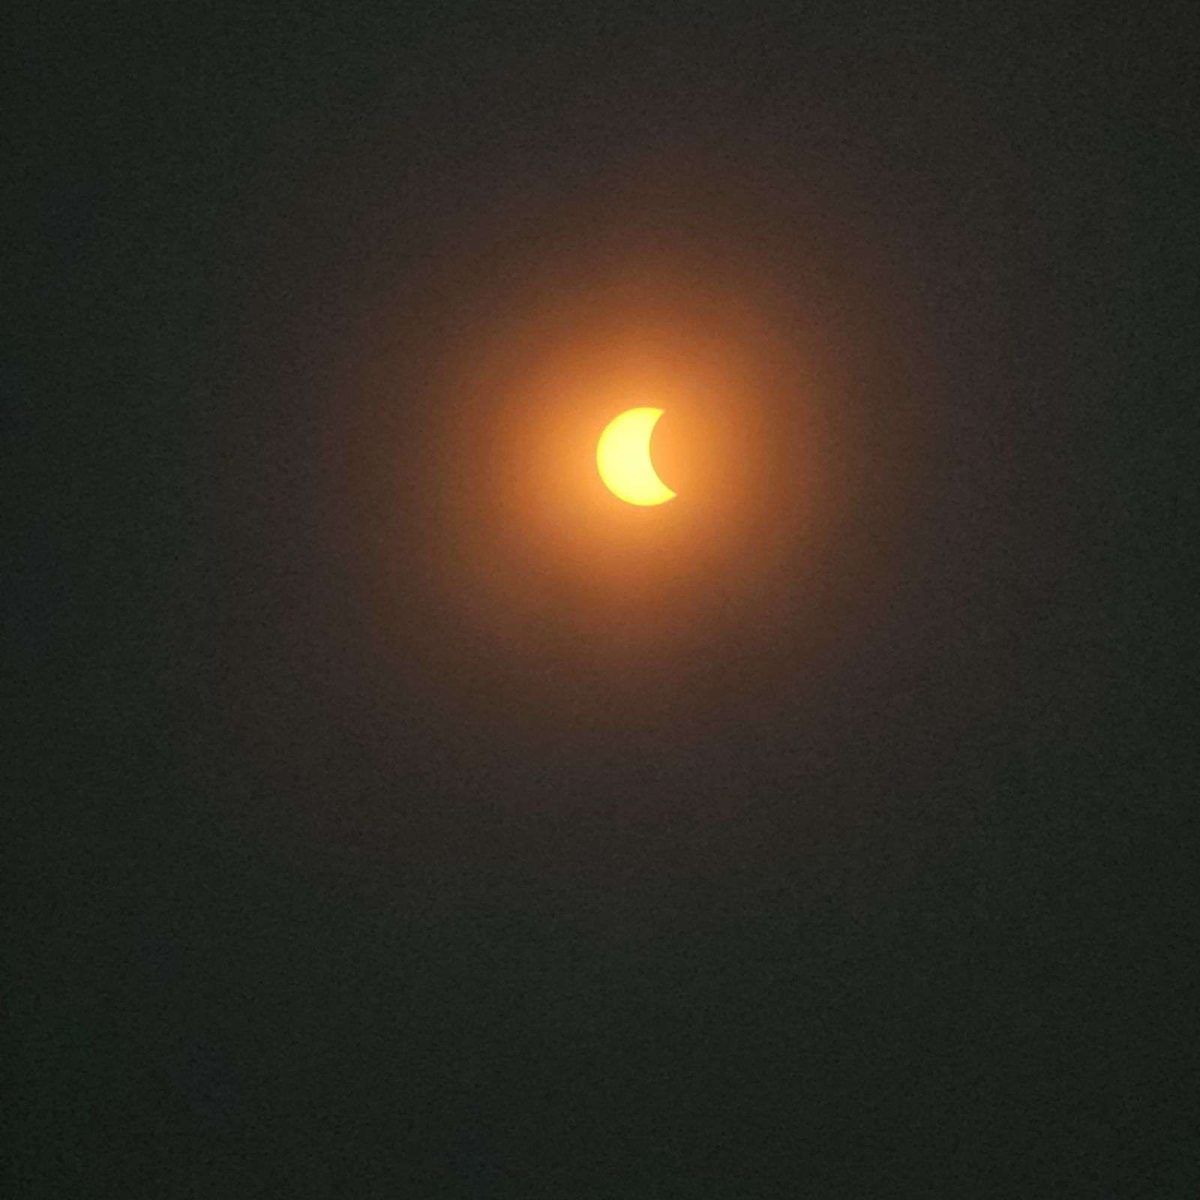 The Solar Eclipse at 1:08 p.m. in Clarkson, AR